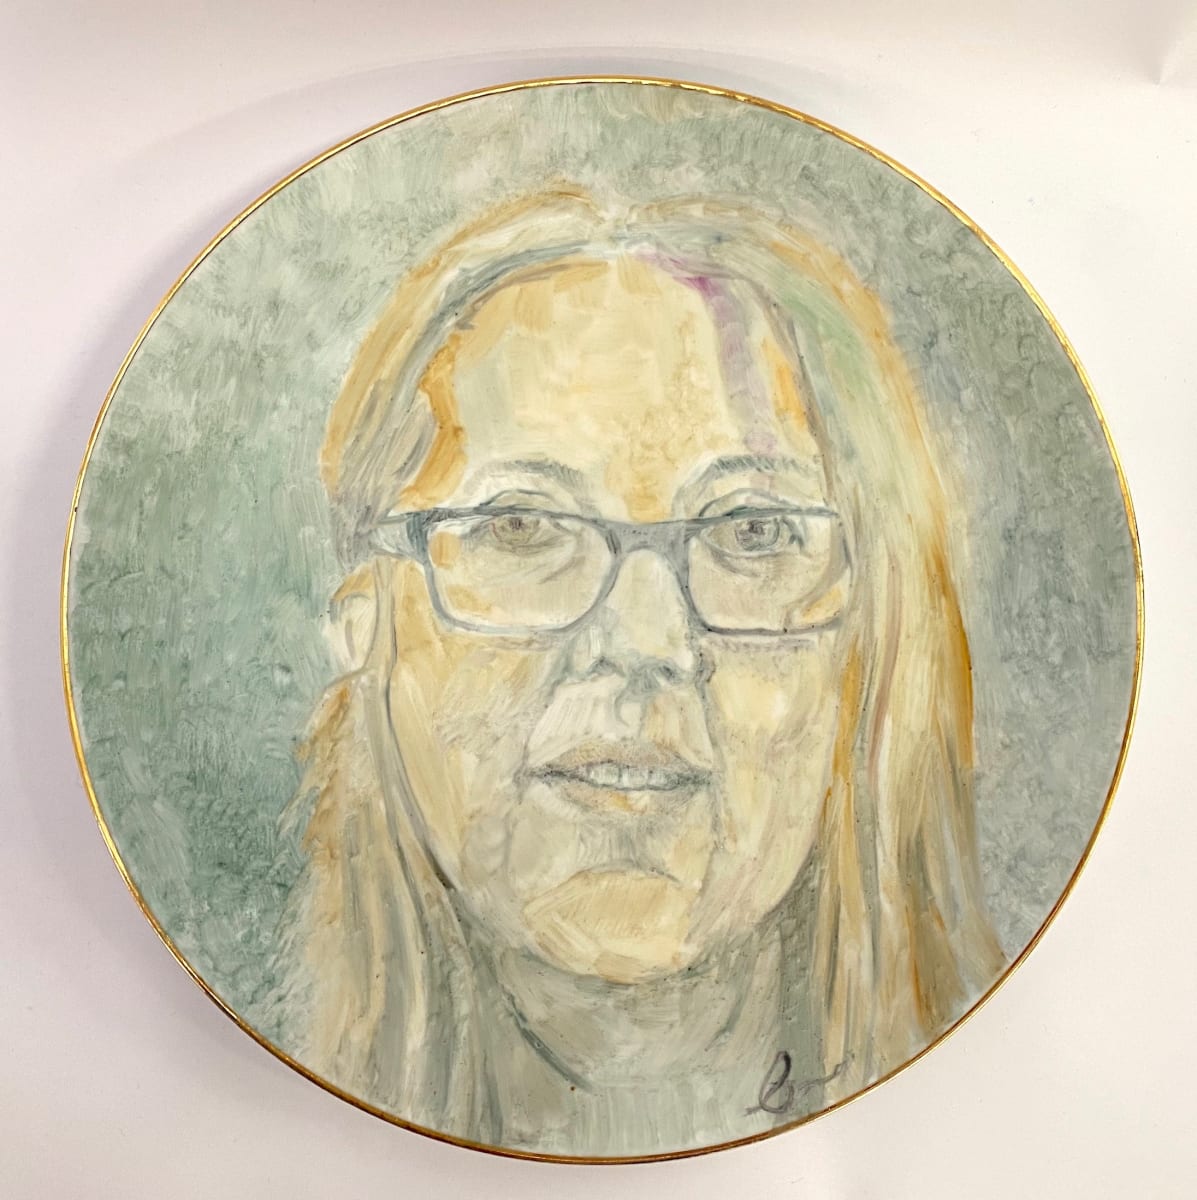 Michelle My Artist Friend by annekwasner@gmail.com  Image: A portrait of Michelle Connolly artist and friend. Onglaze on an up-cycled plate.